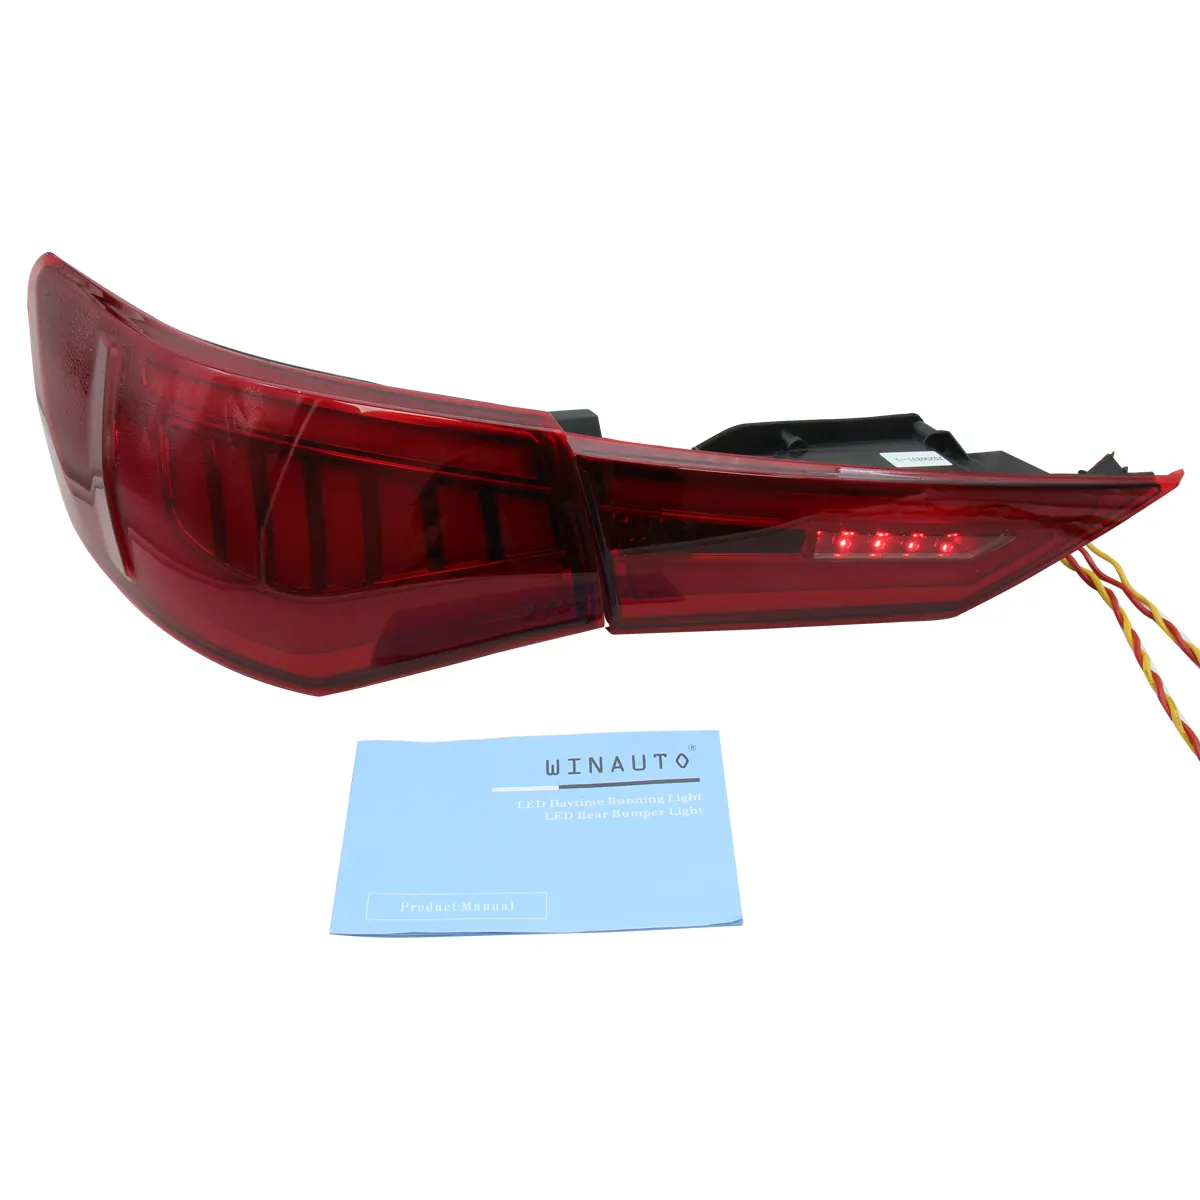 Rear light tail lamp for Nissan Sylphy Or Sentra or Pulsar 2019 - 2020 year red black color